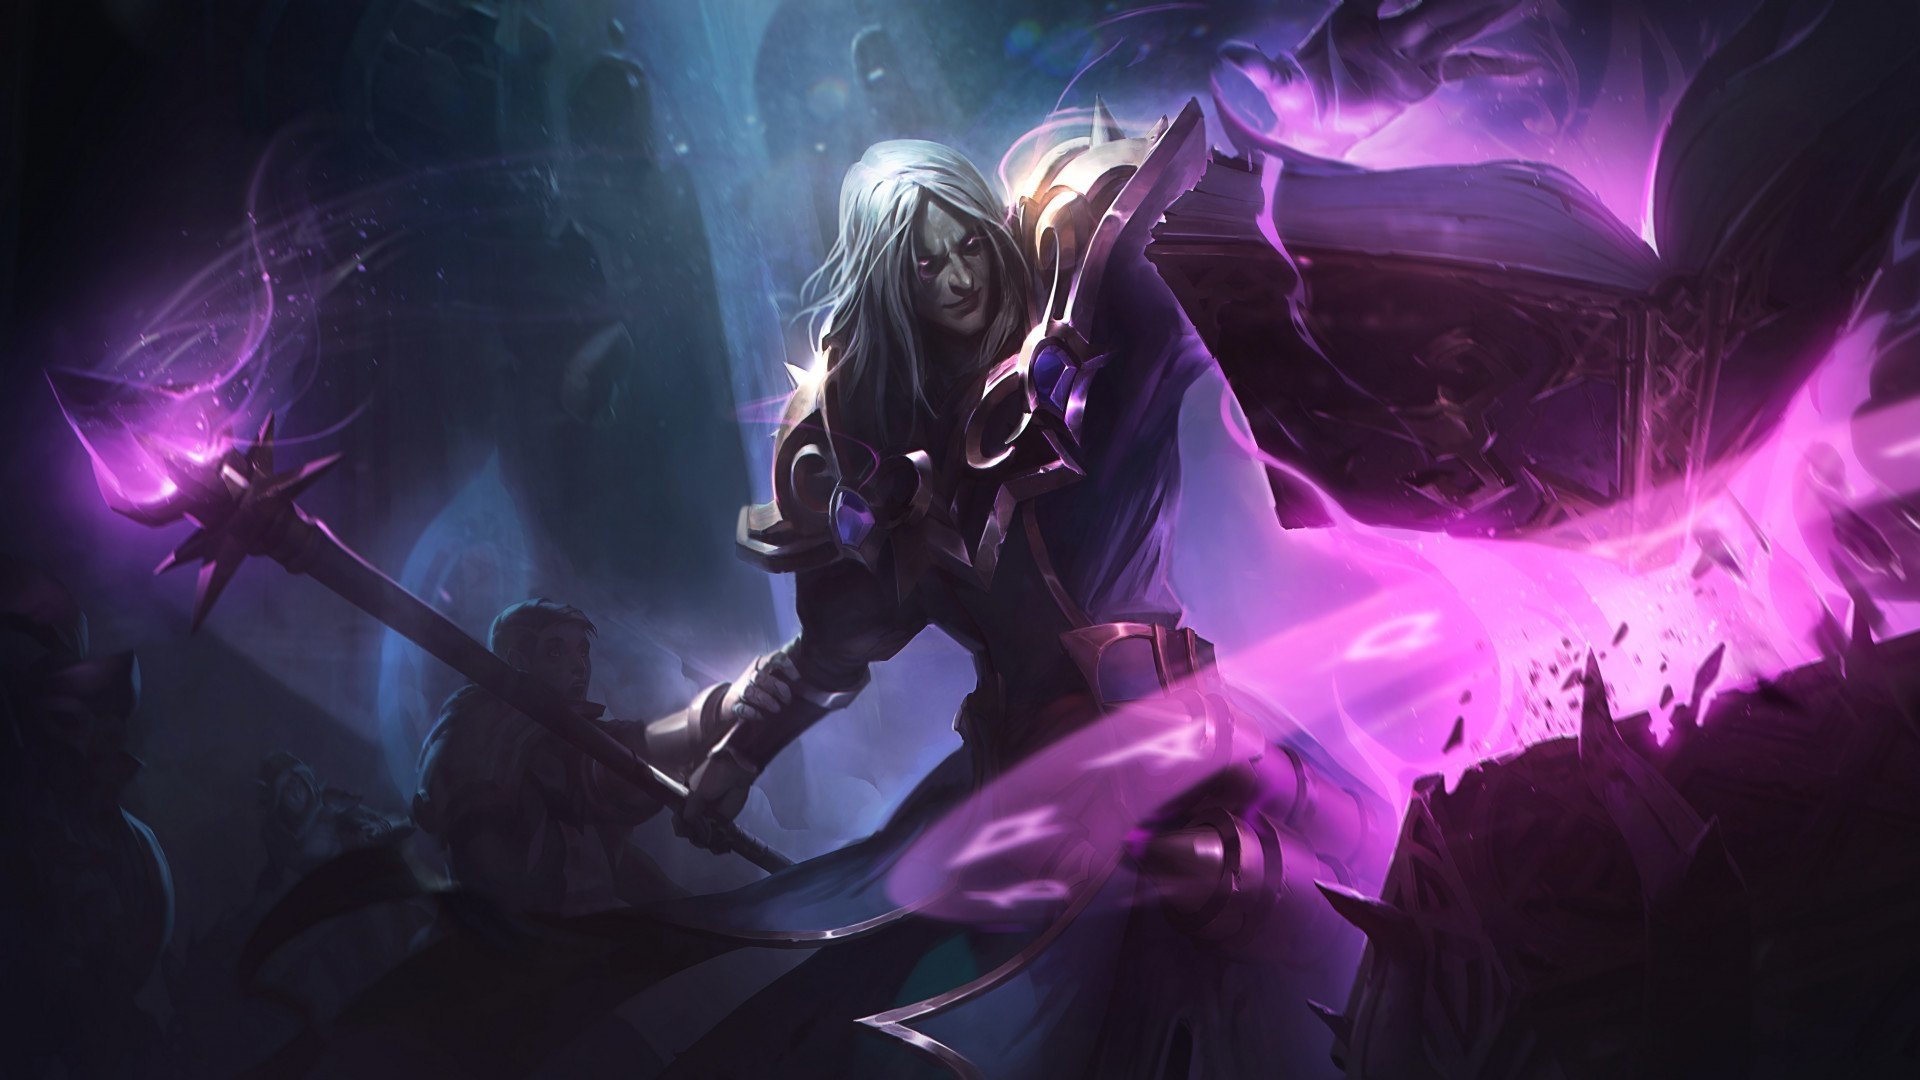 Best League Of Legends Jungle Lane Champions For Patch 10.22 To Climb Ranks In Solo Queue